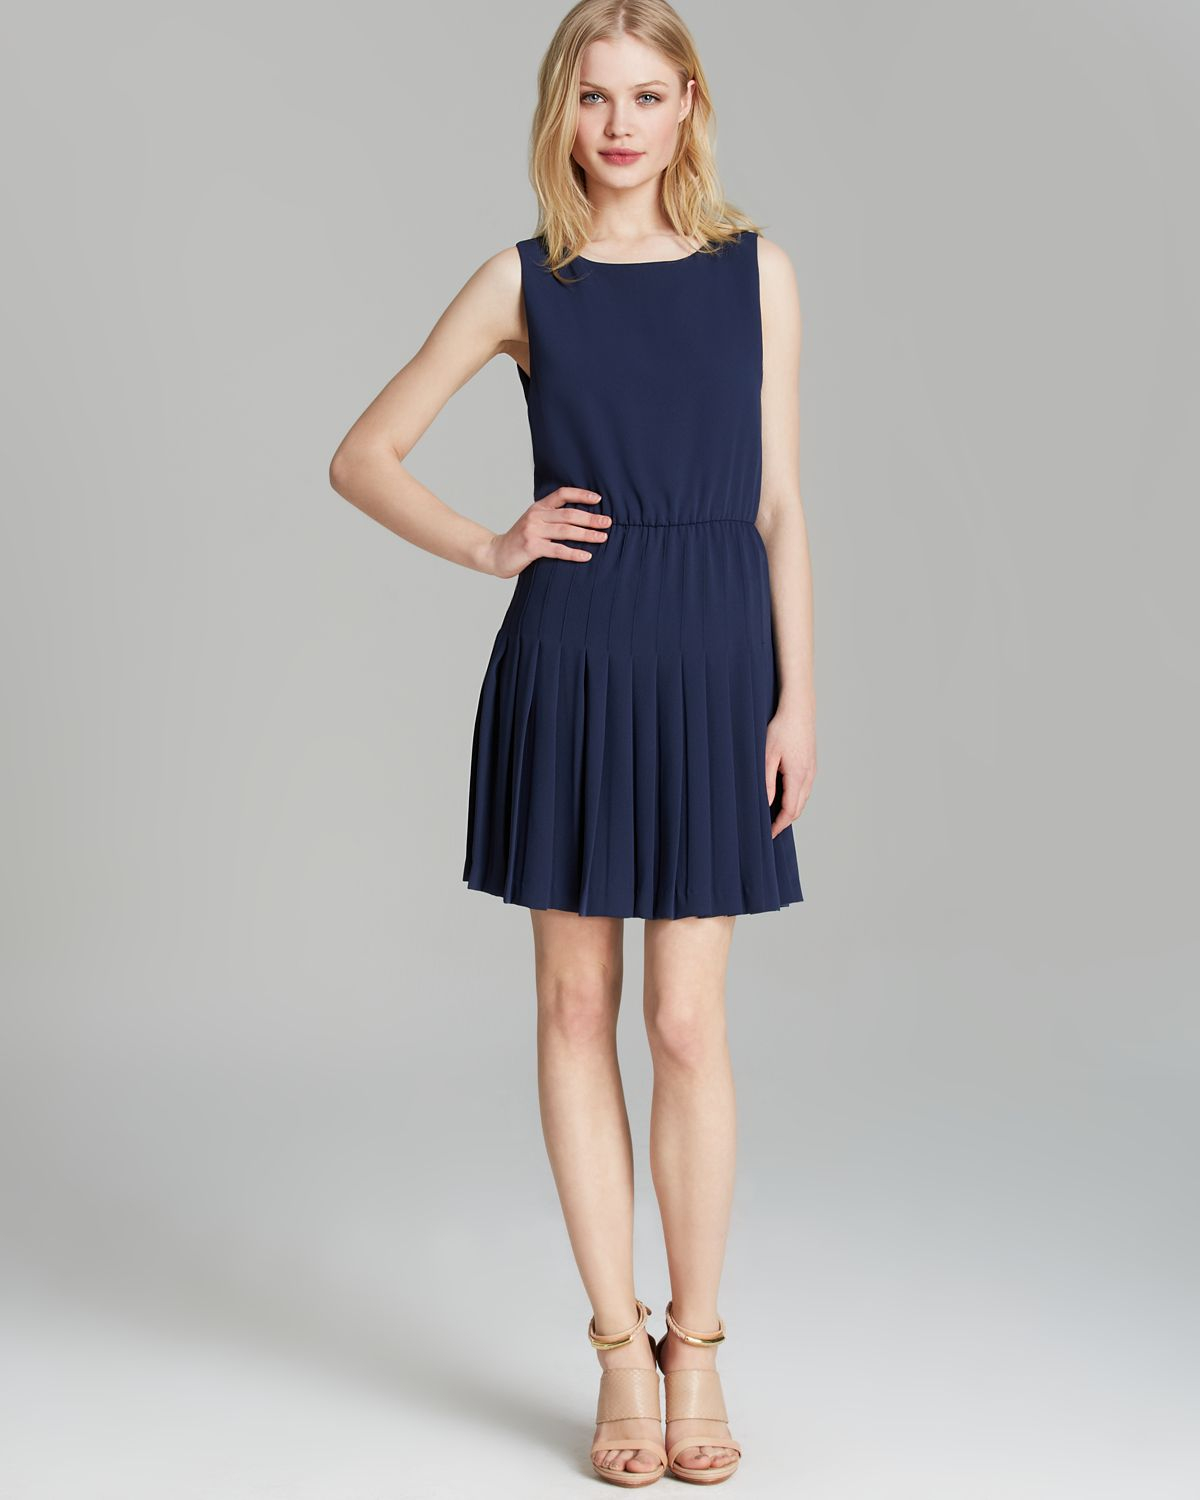 Alice + olivia Shanna Fit and Flare Pleated Dress in Blue | Lyst